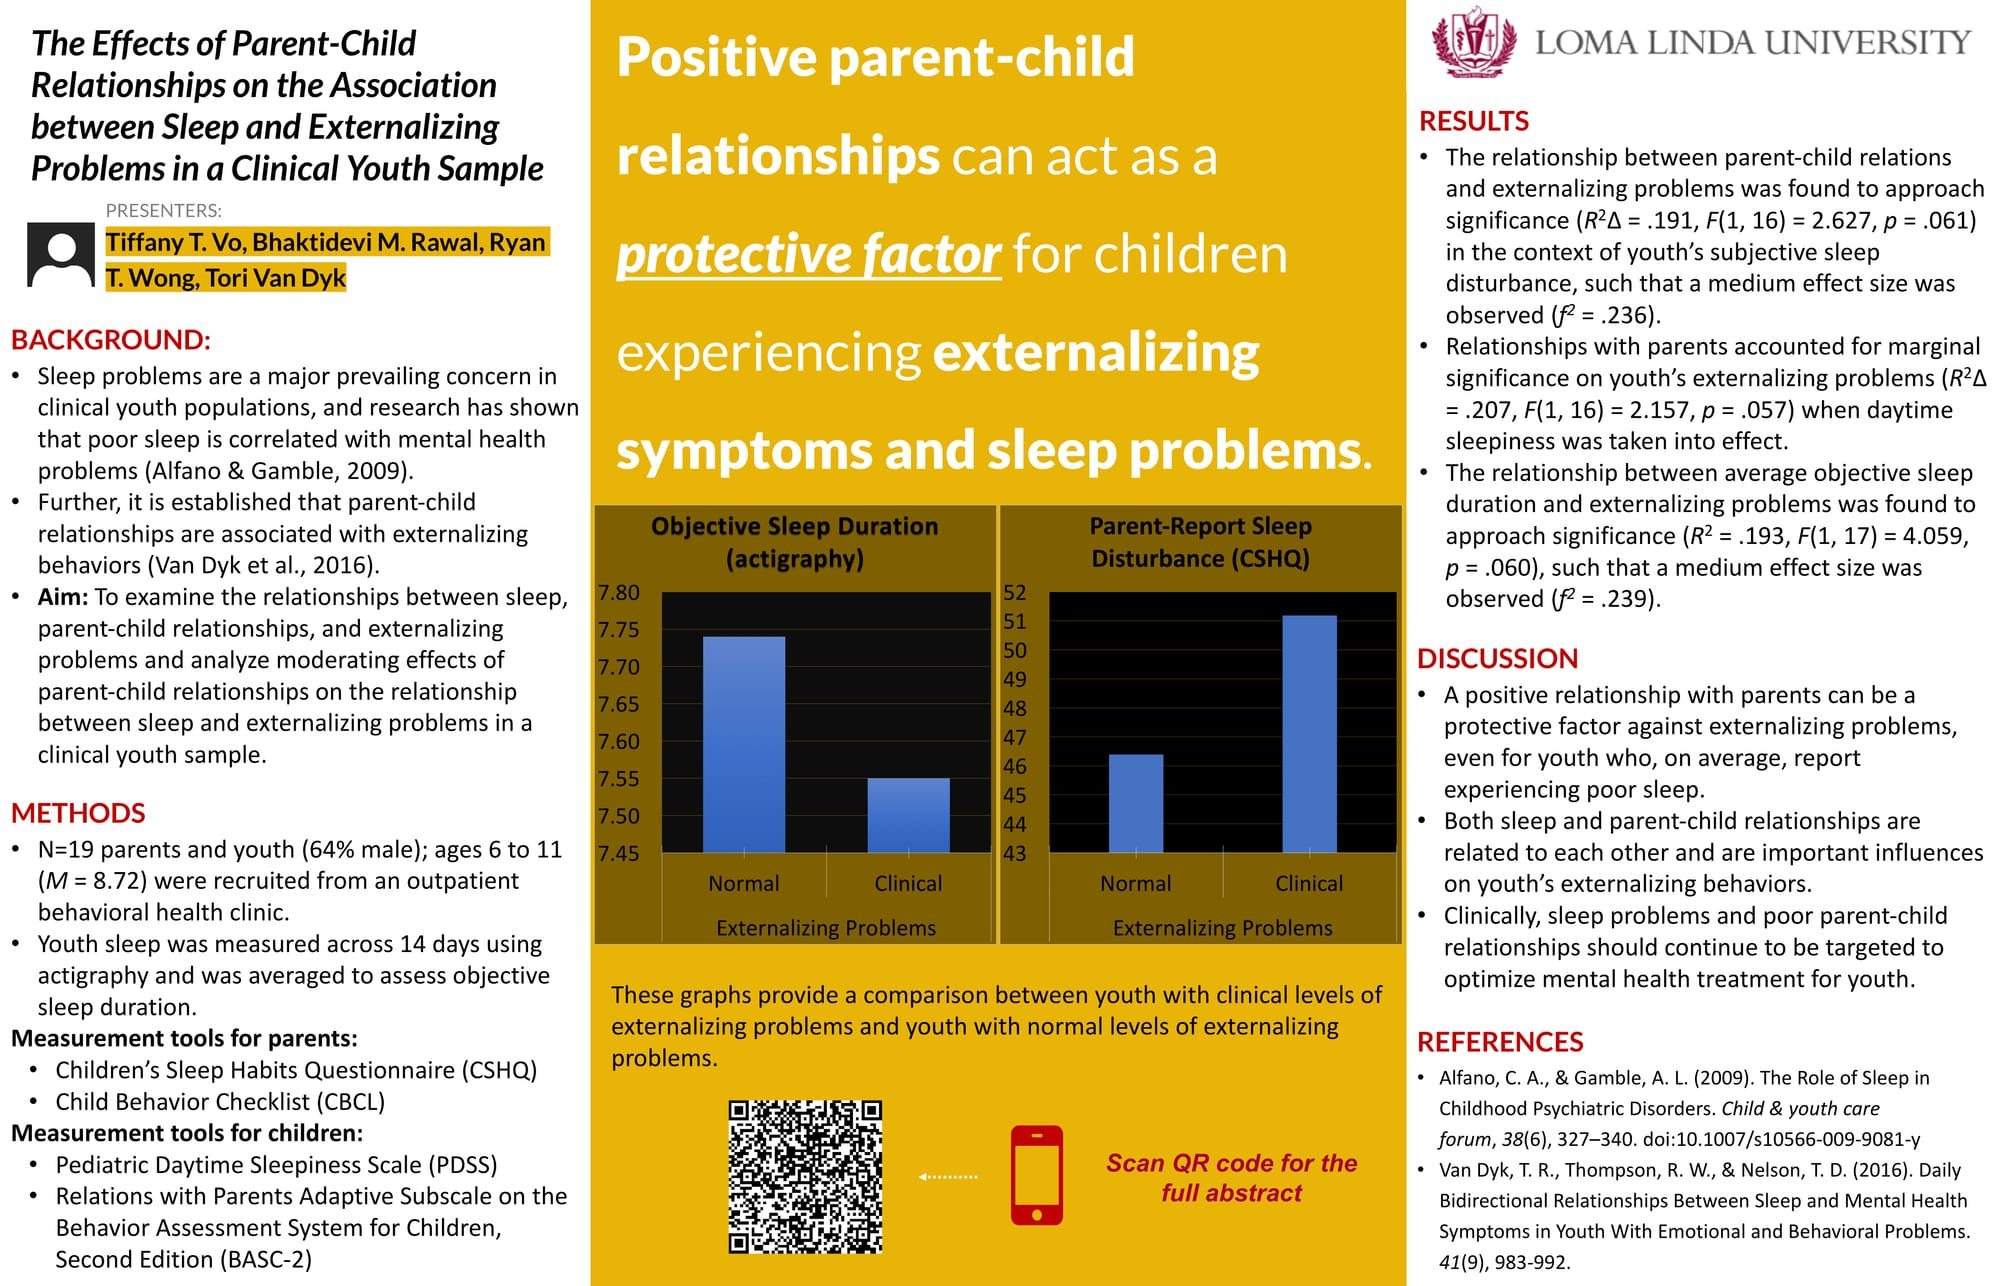 The Effects of Parent-Child Relationships on the Association between Sleep and Externalizing Problems in a Clinical Youth Sample